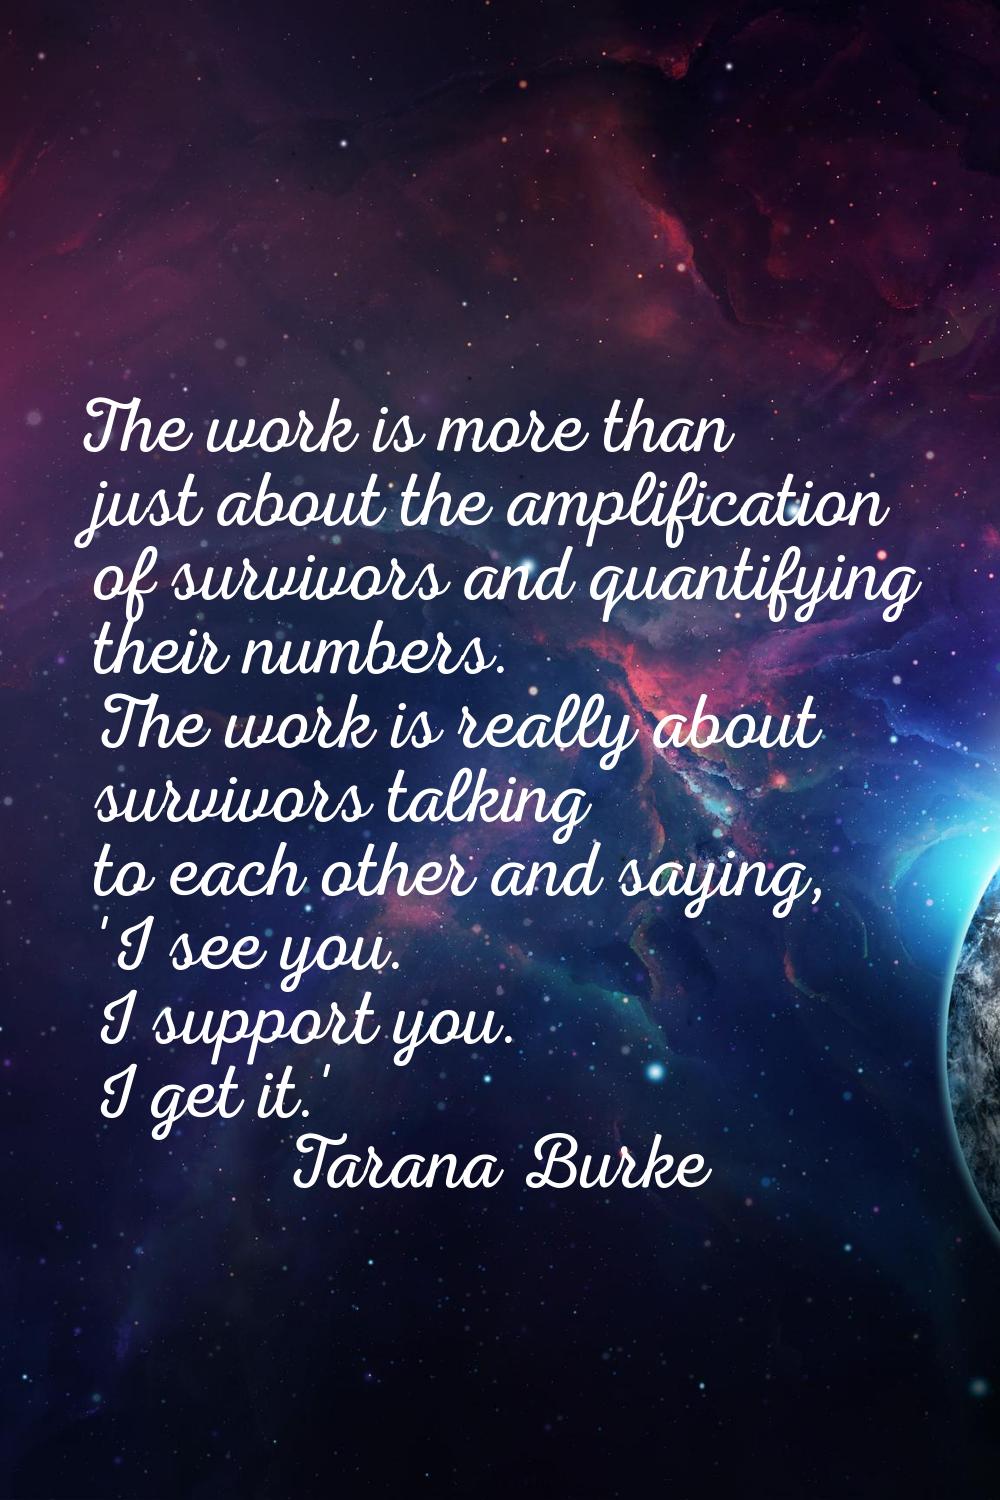 The work is more than just about the amplification of survivors and quantifying their numbers. The 